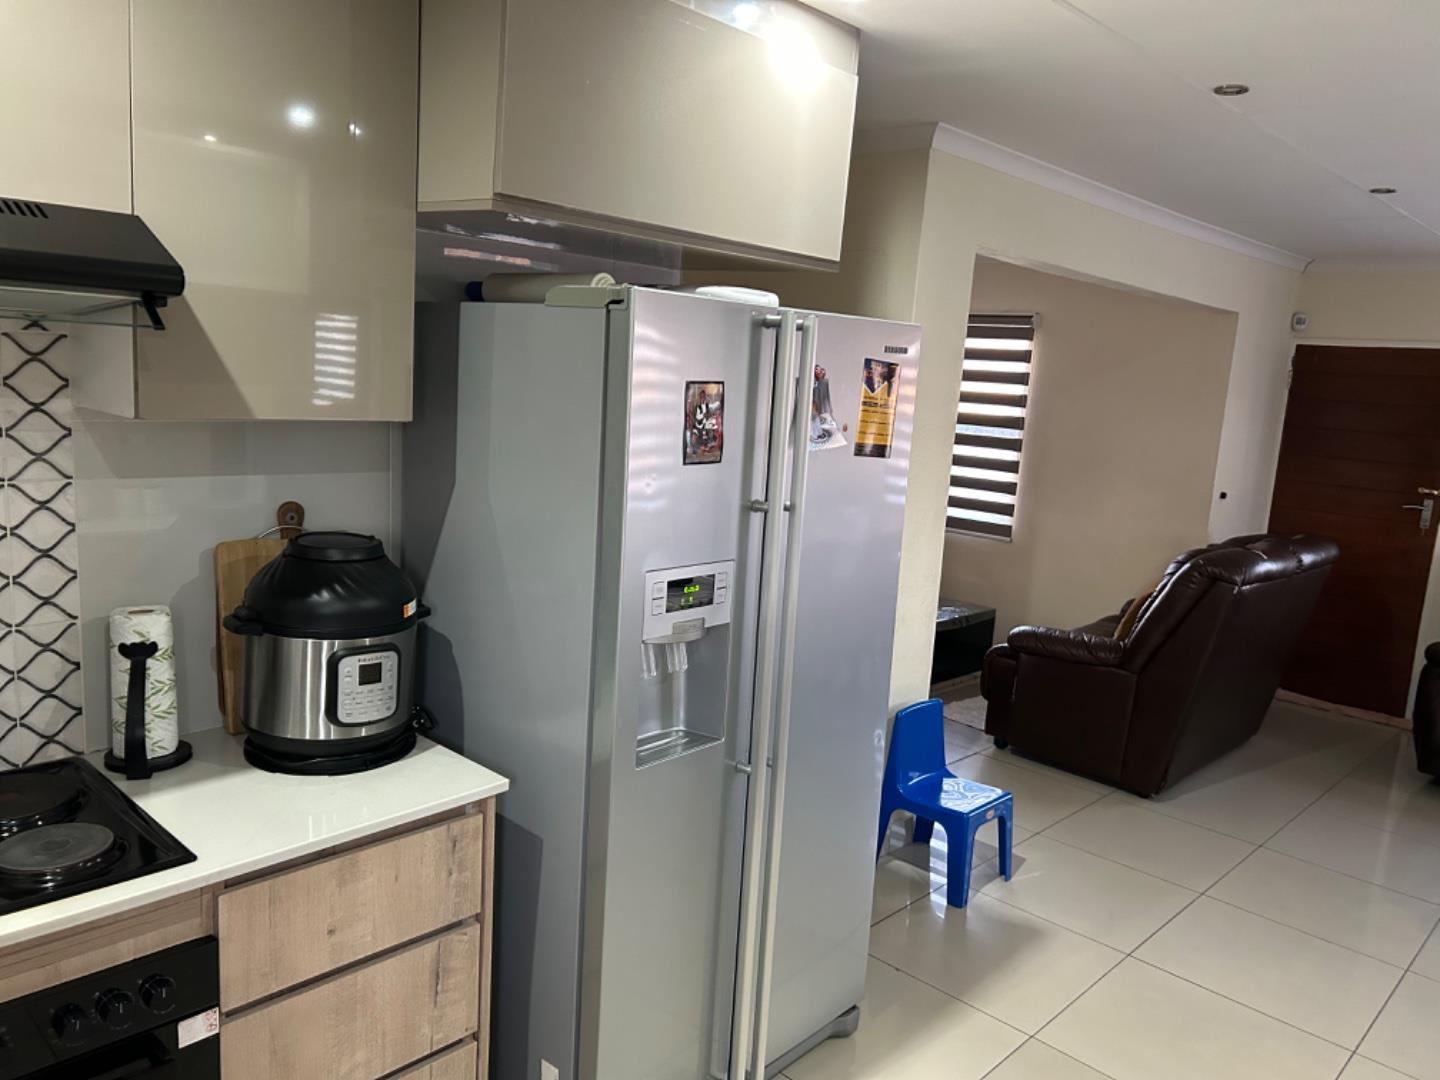 To Let 2 Bedroom Property for Rent in Mindalore Gauteng